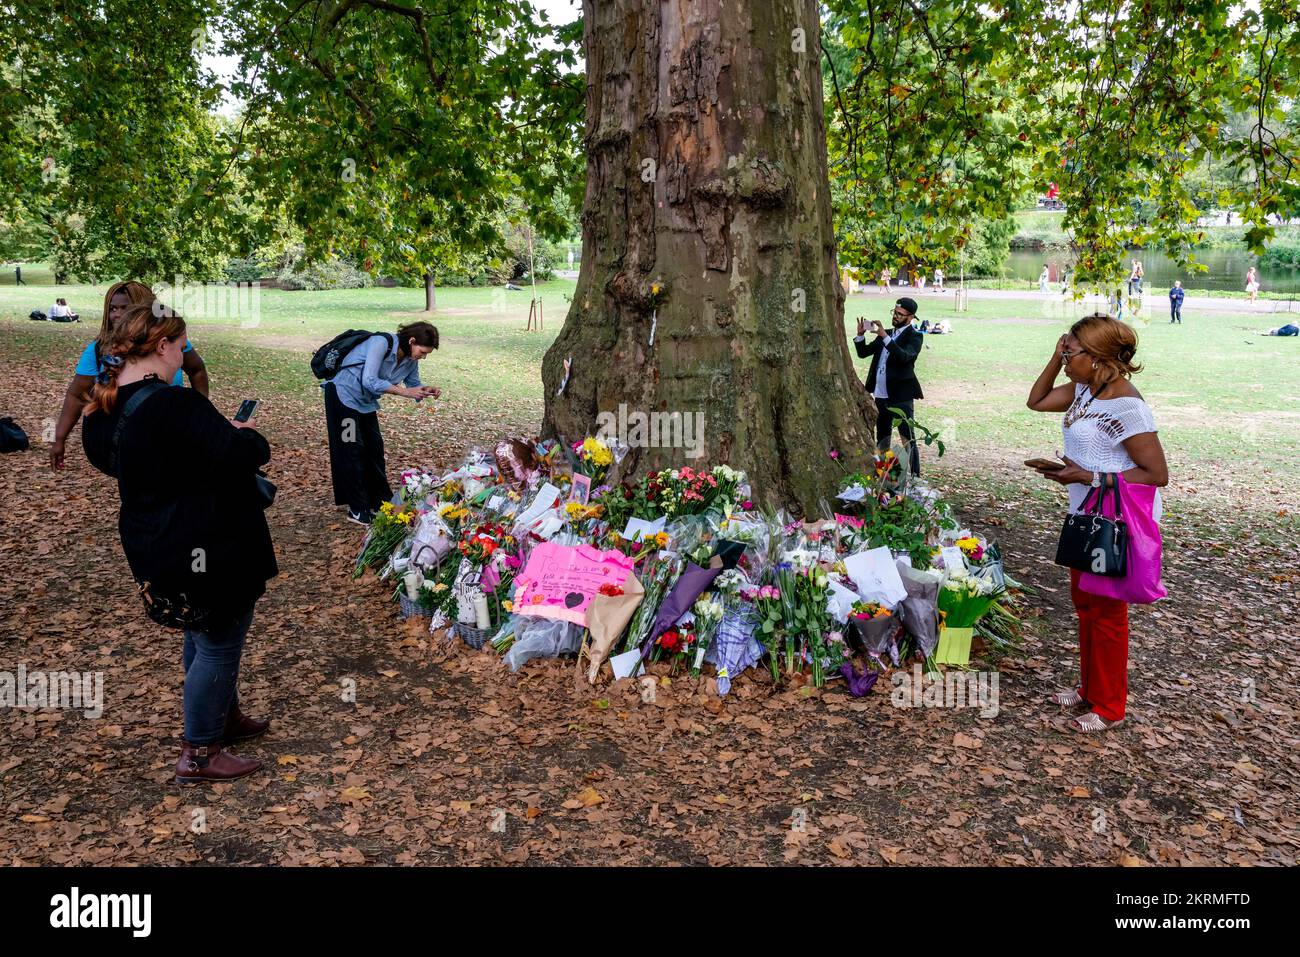 Floral Tributes Left For Queen Elizabeth II In St Jame's Park, London, UK. Stock Photo